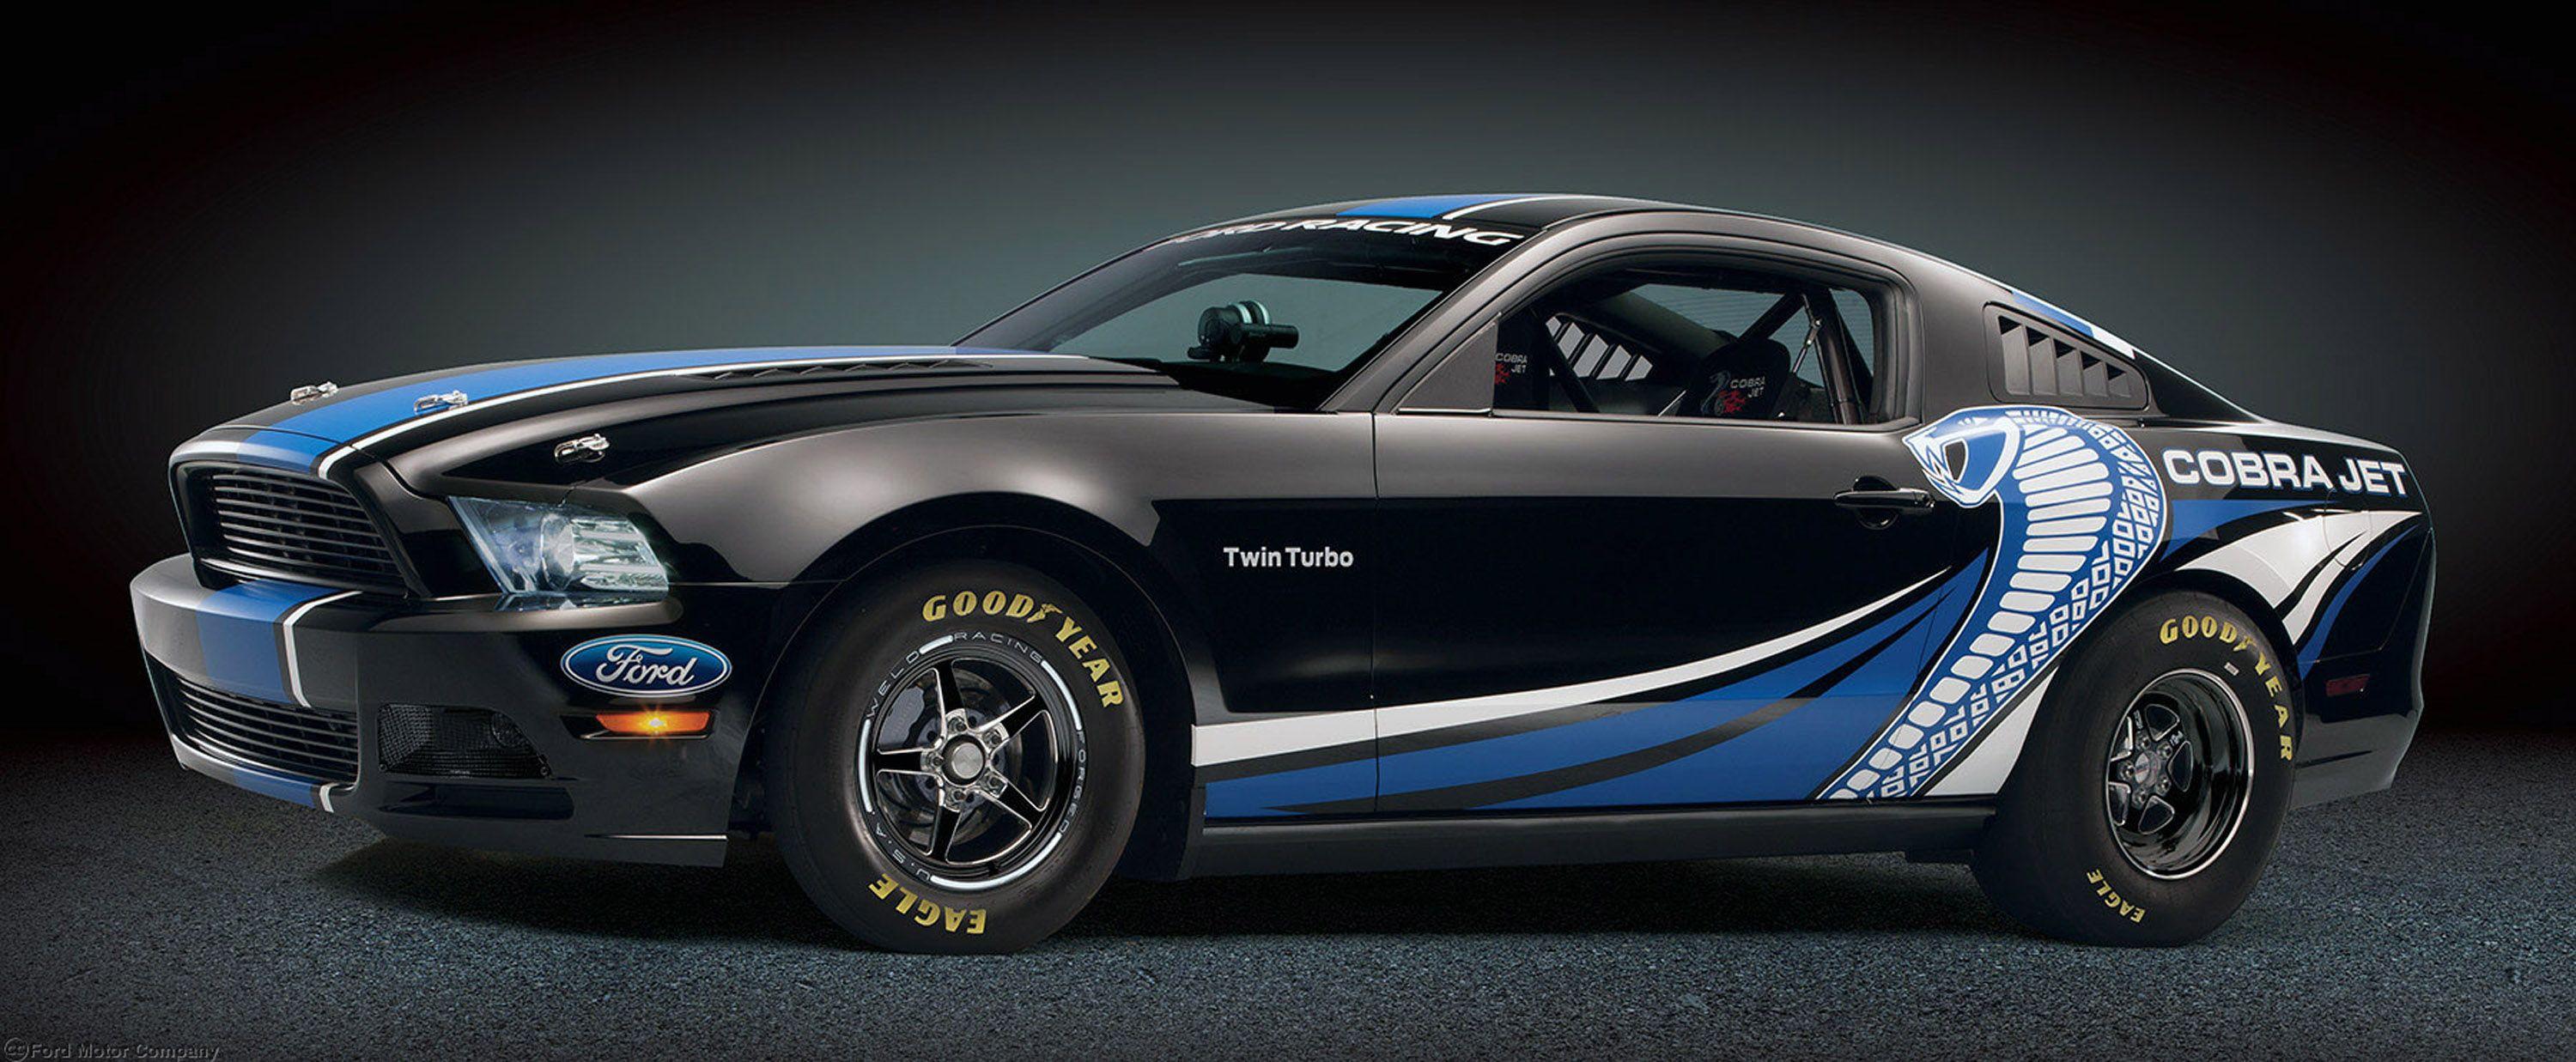 Ford Mustang Cobra Jet Twin Turbo HD Wallpaper. Background